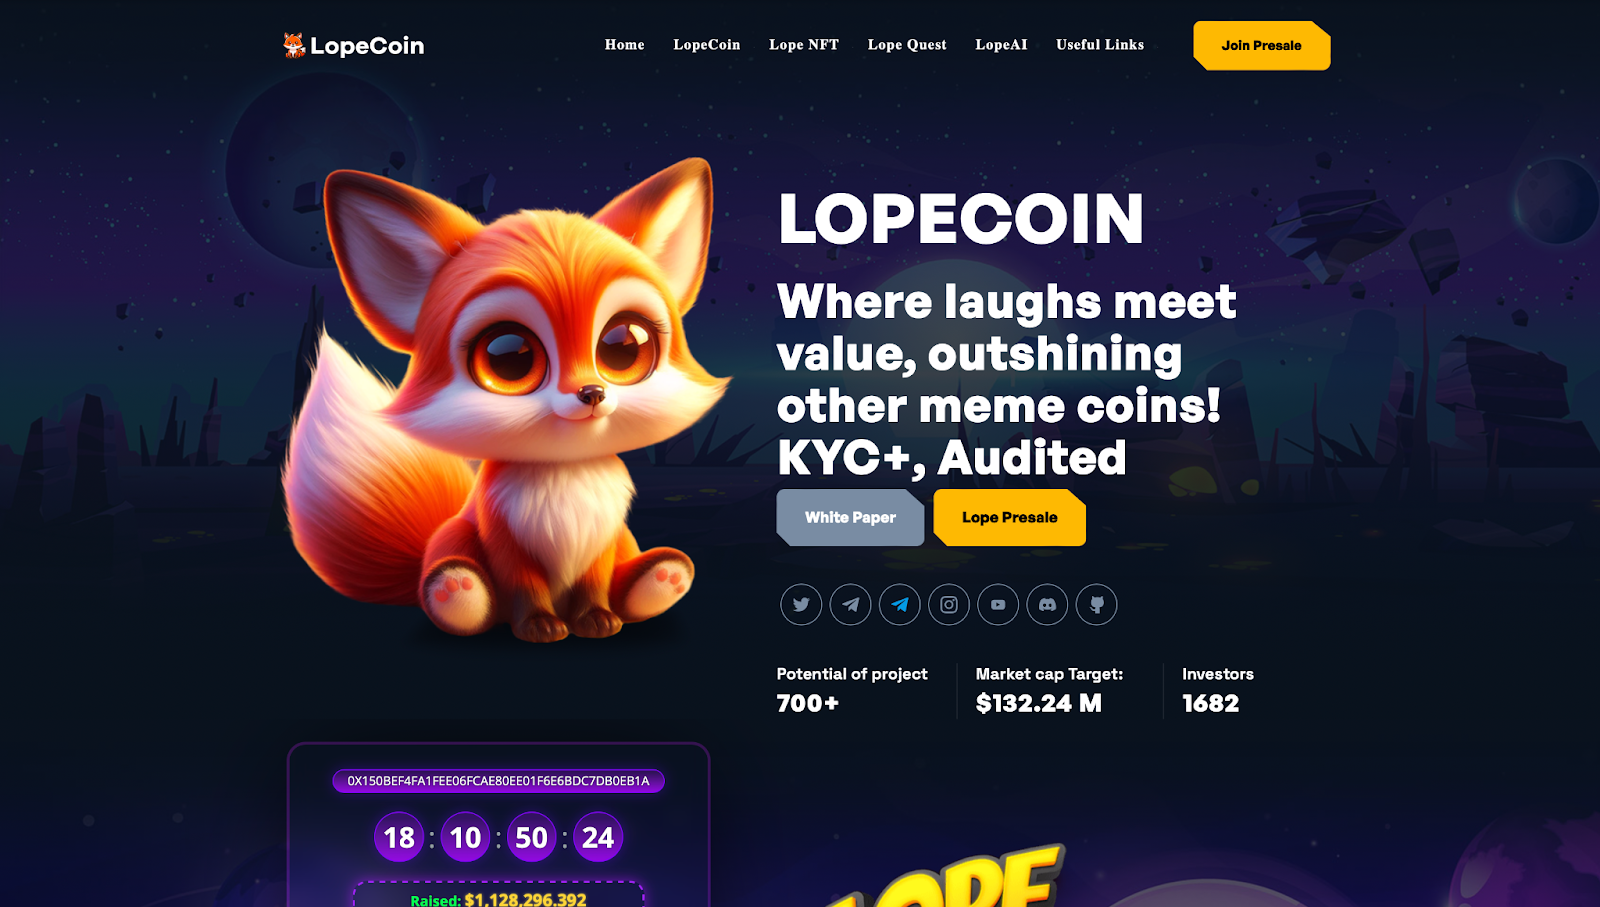 lope-coin-image